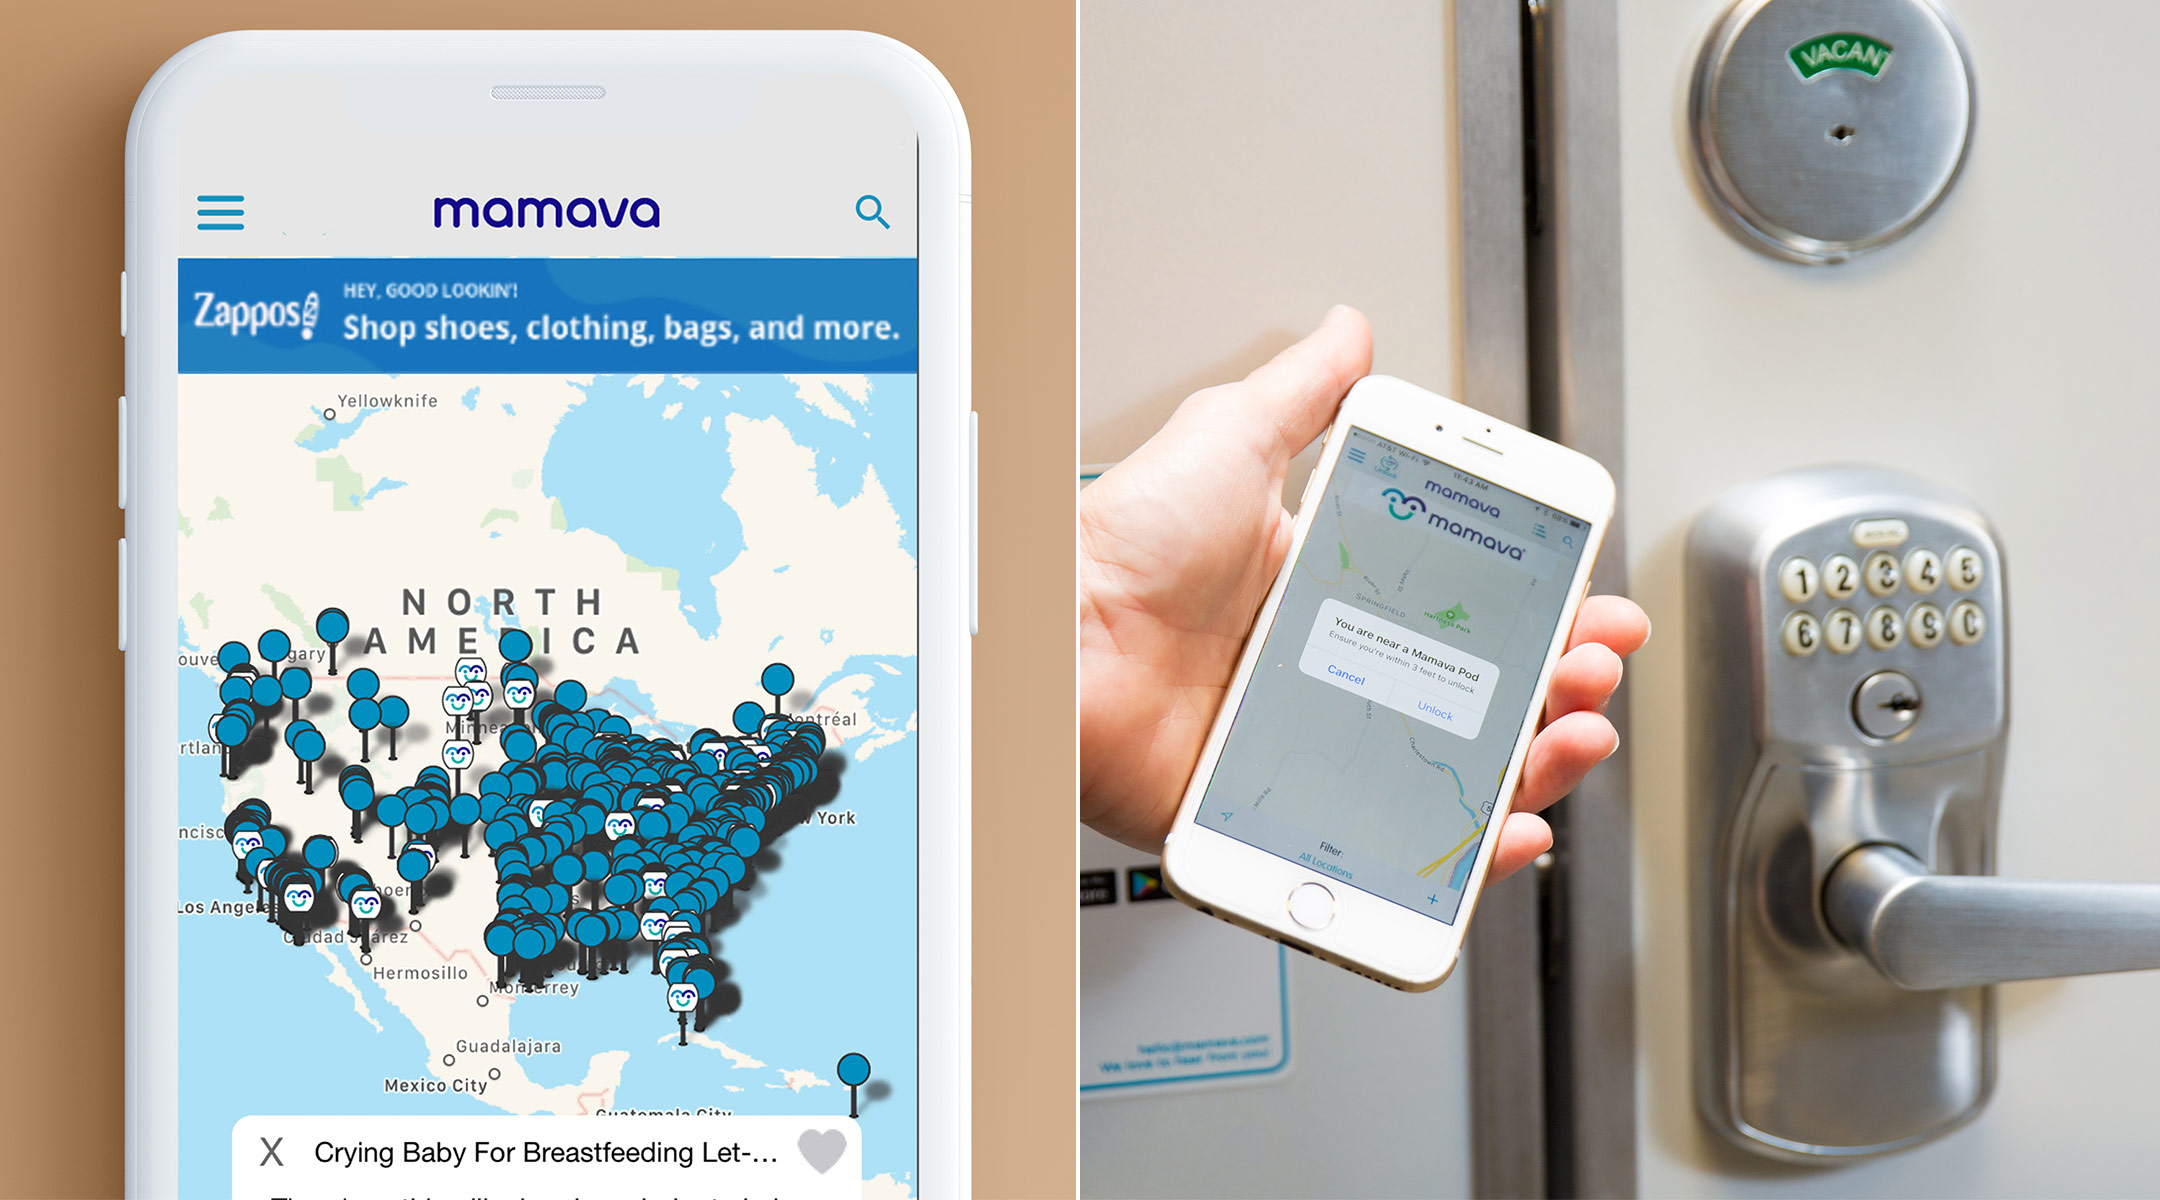 mamava releases mobile app that tells you where their breastfeeding pods are located. 